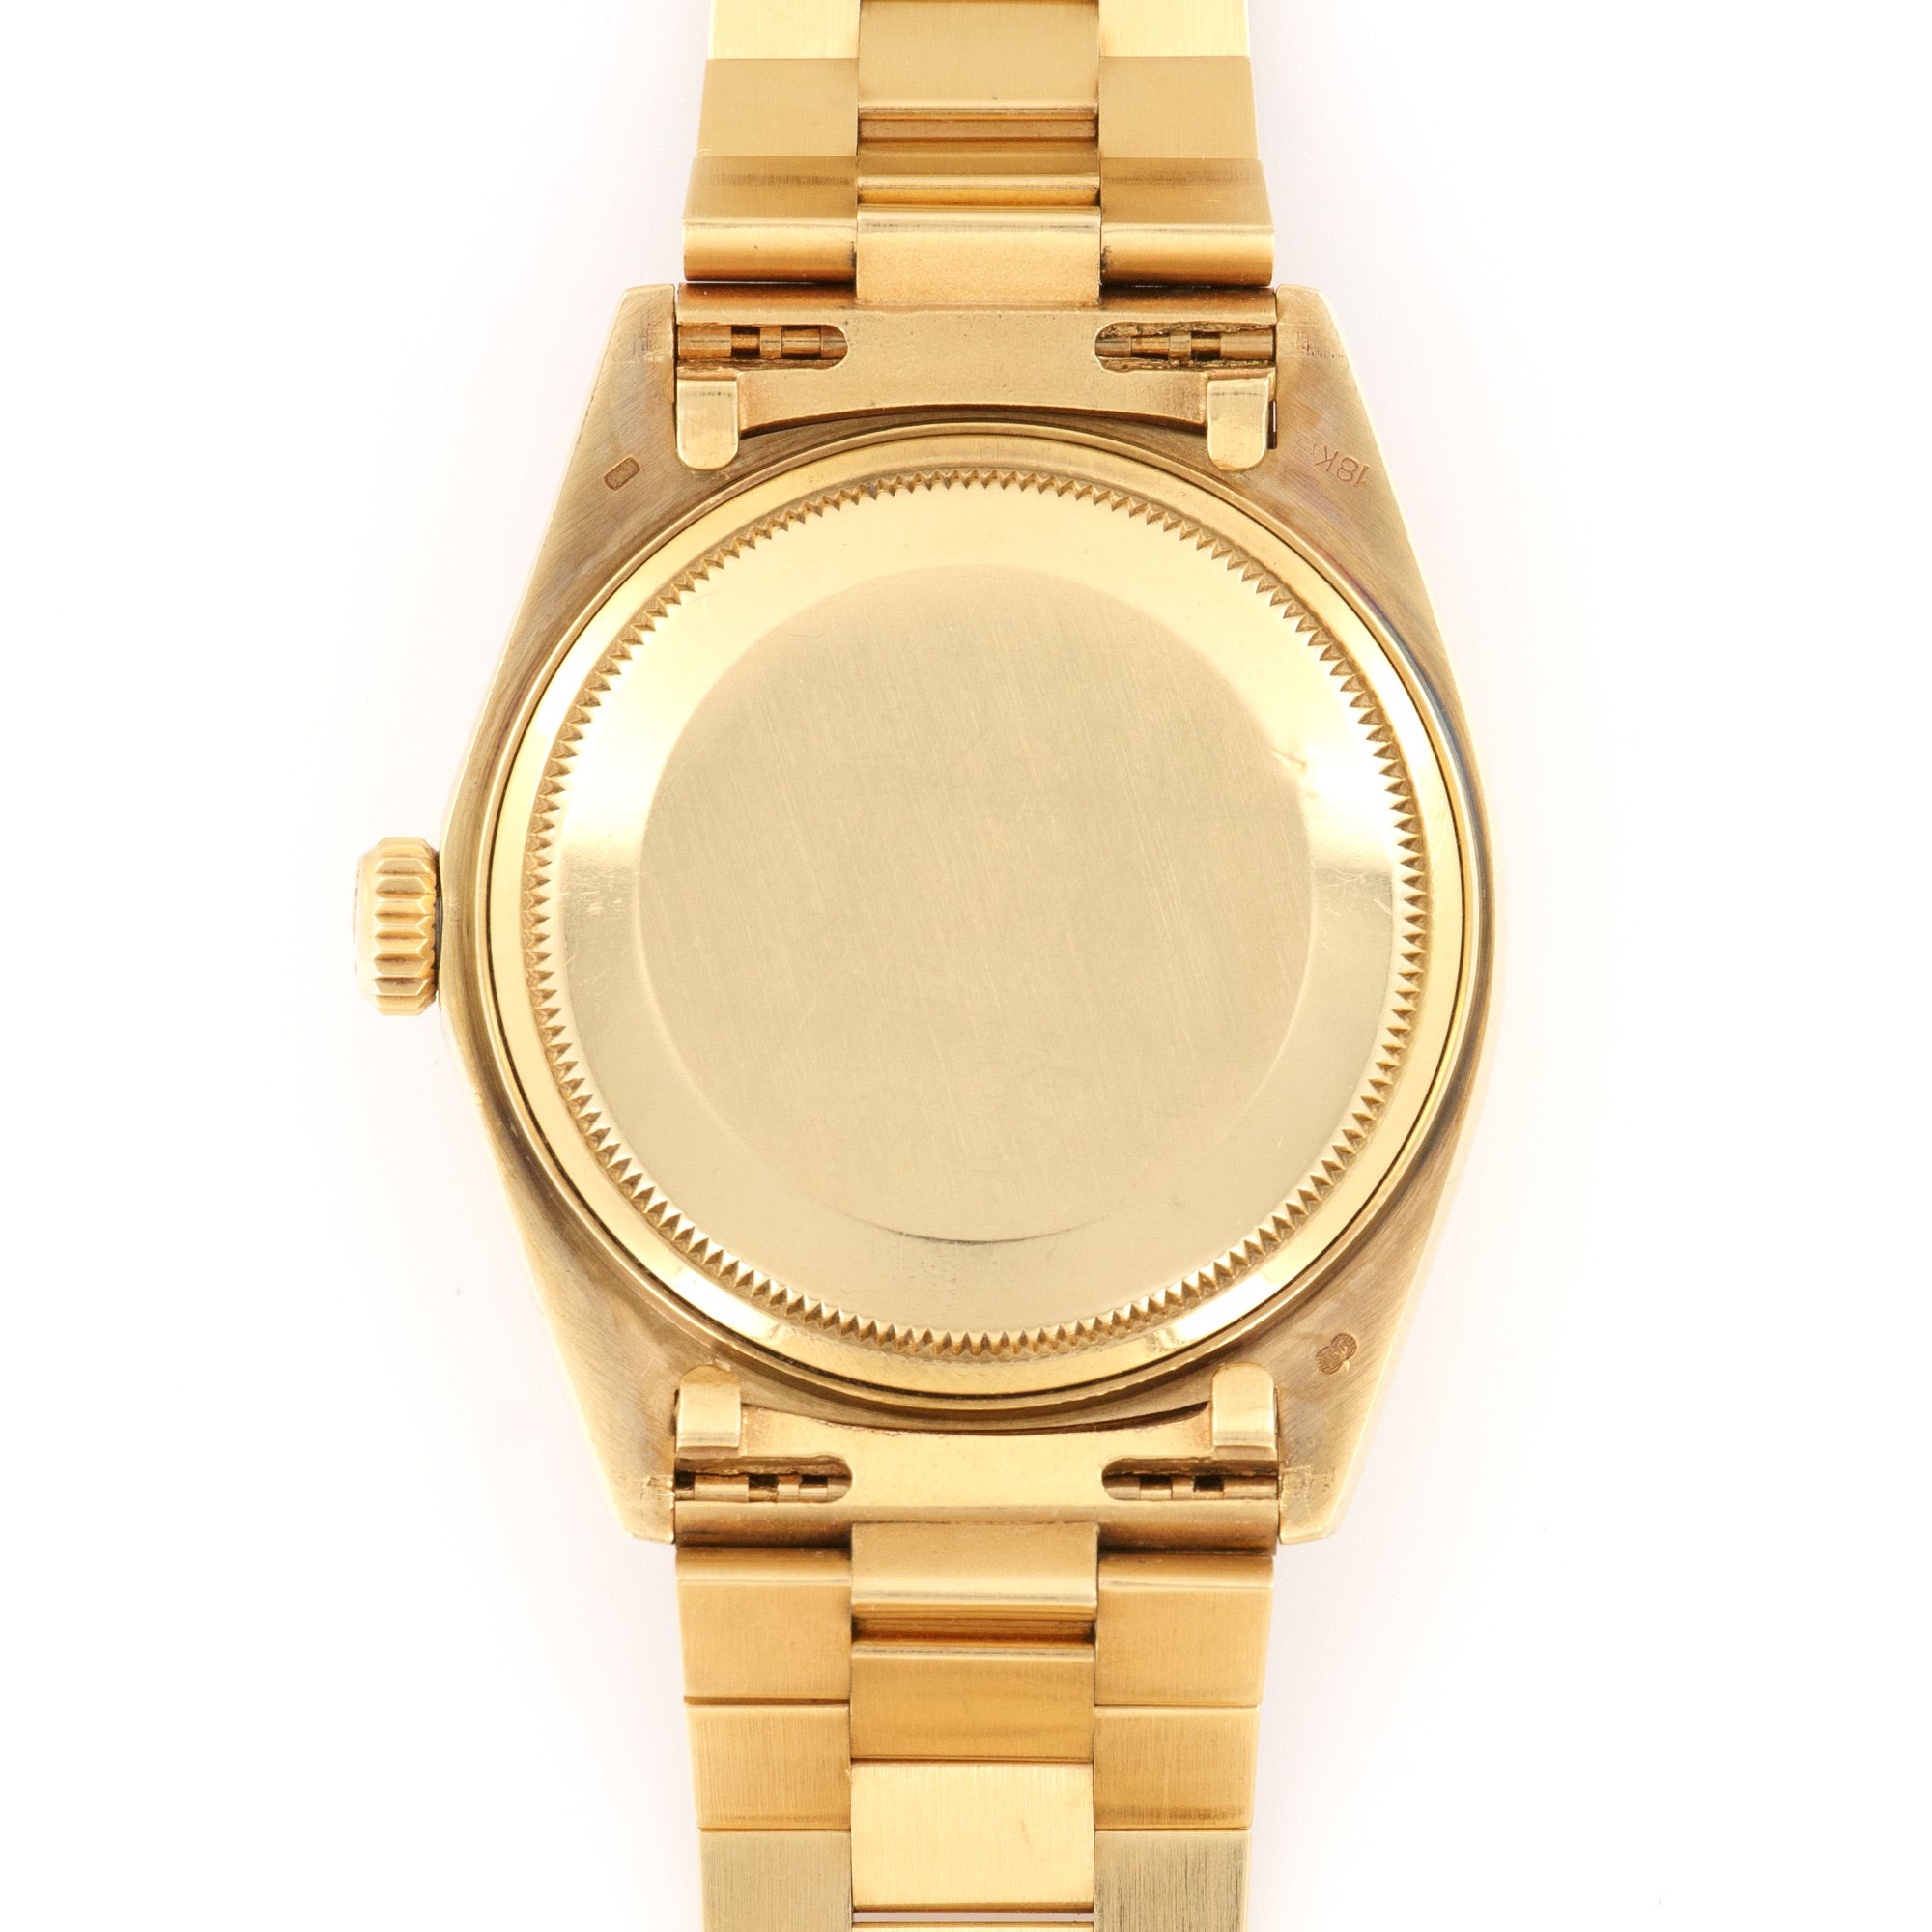 Rolex - Rolex Yellow Gold Day-Date Watch Ref. 18038, Retailed by Tiffany &amp; Co. - The Keystone Watches